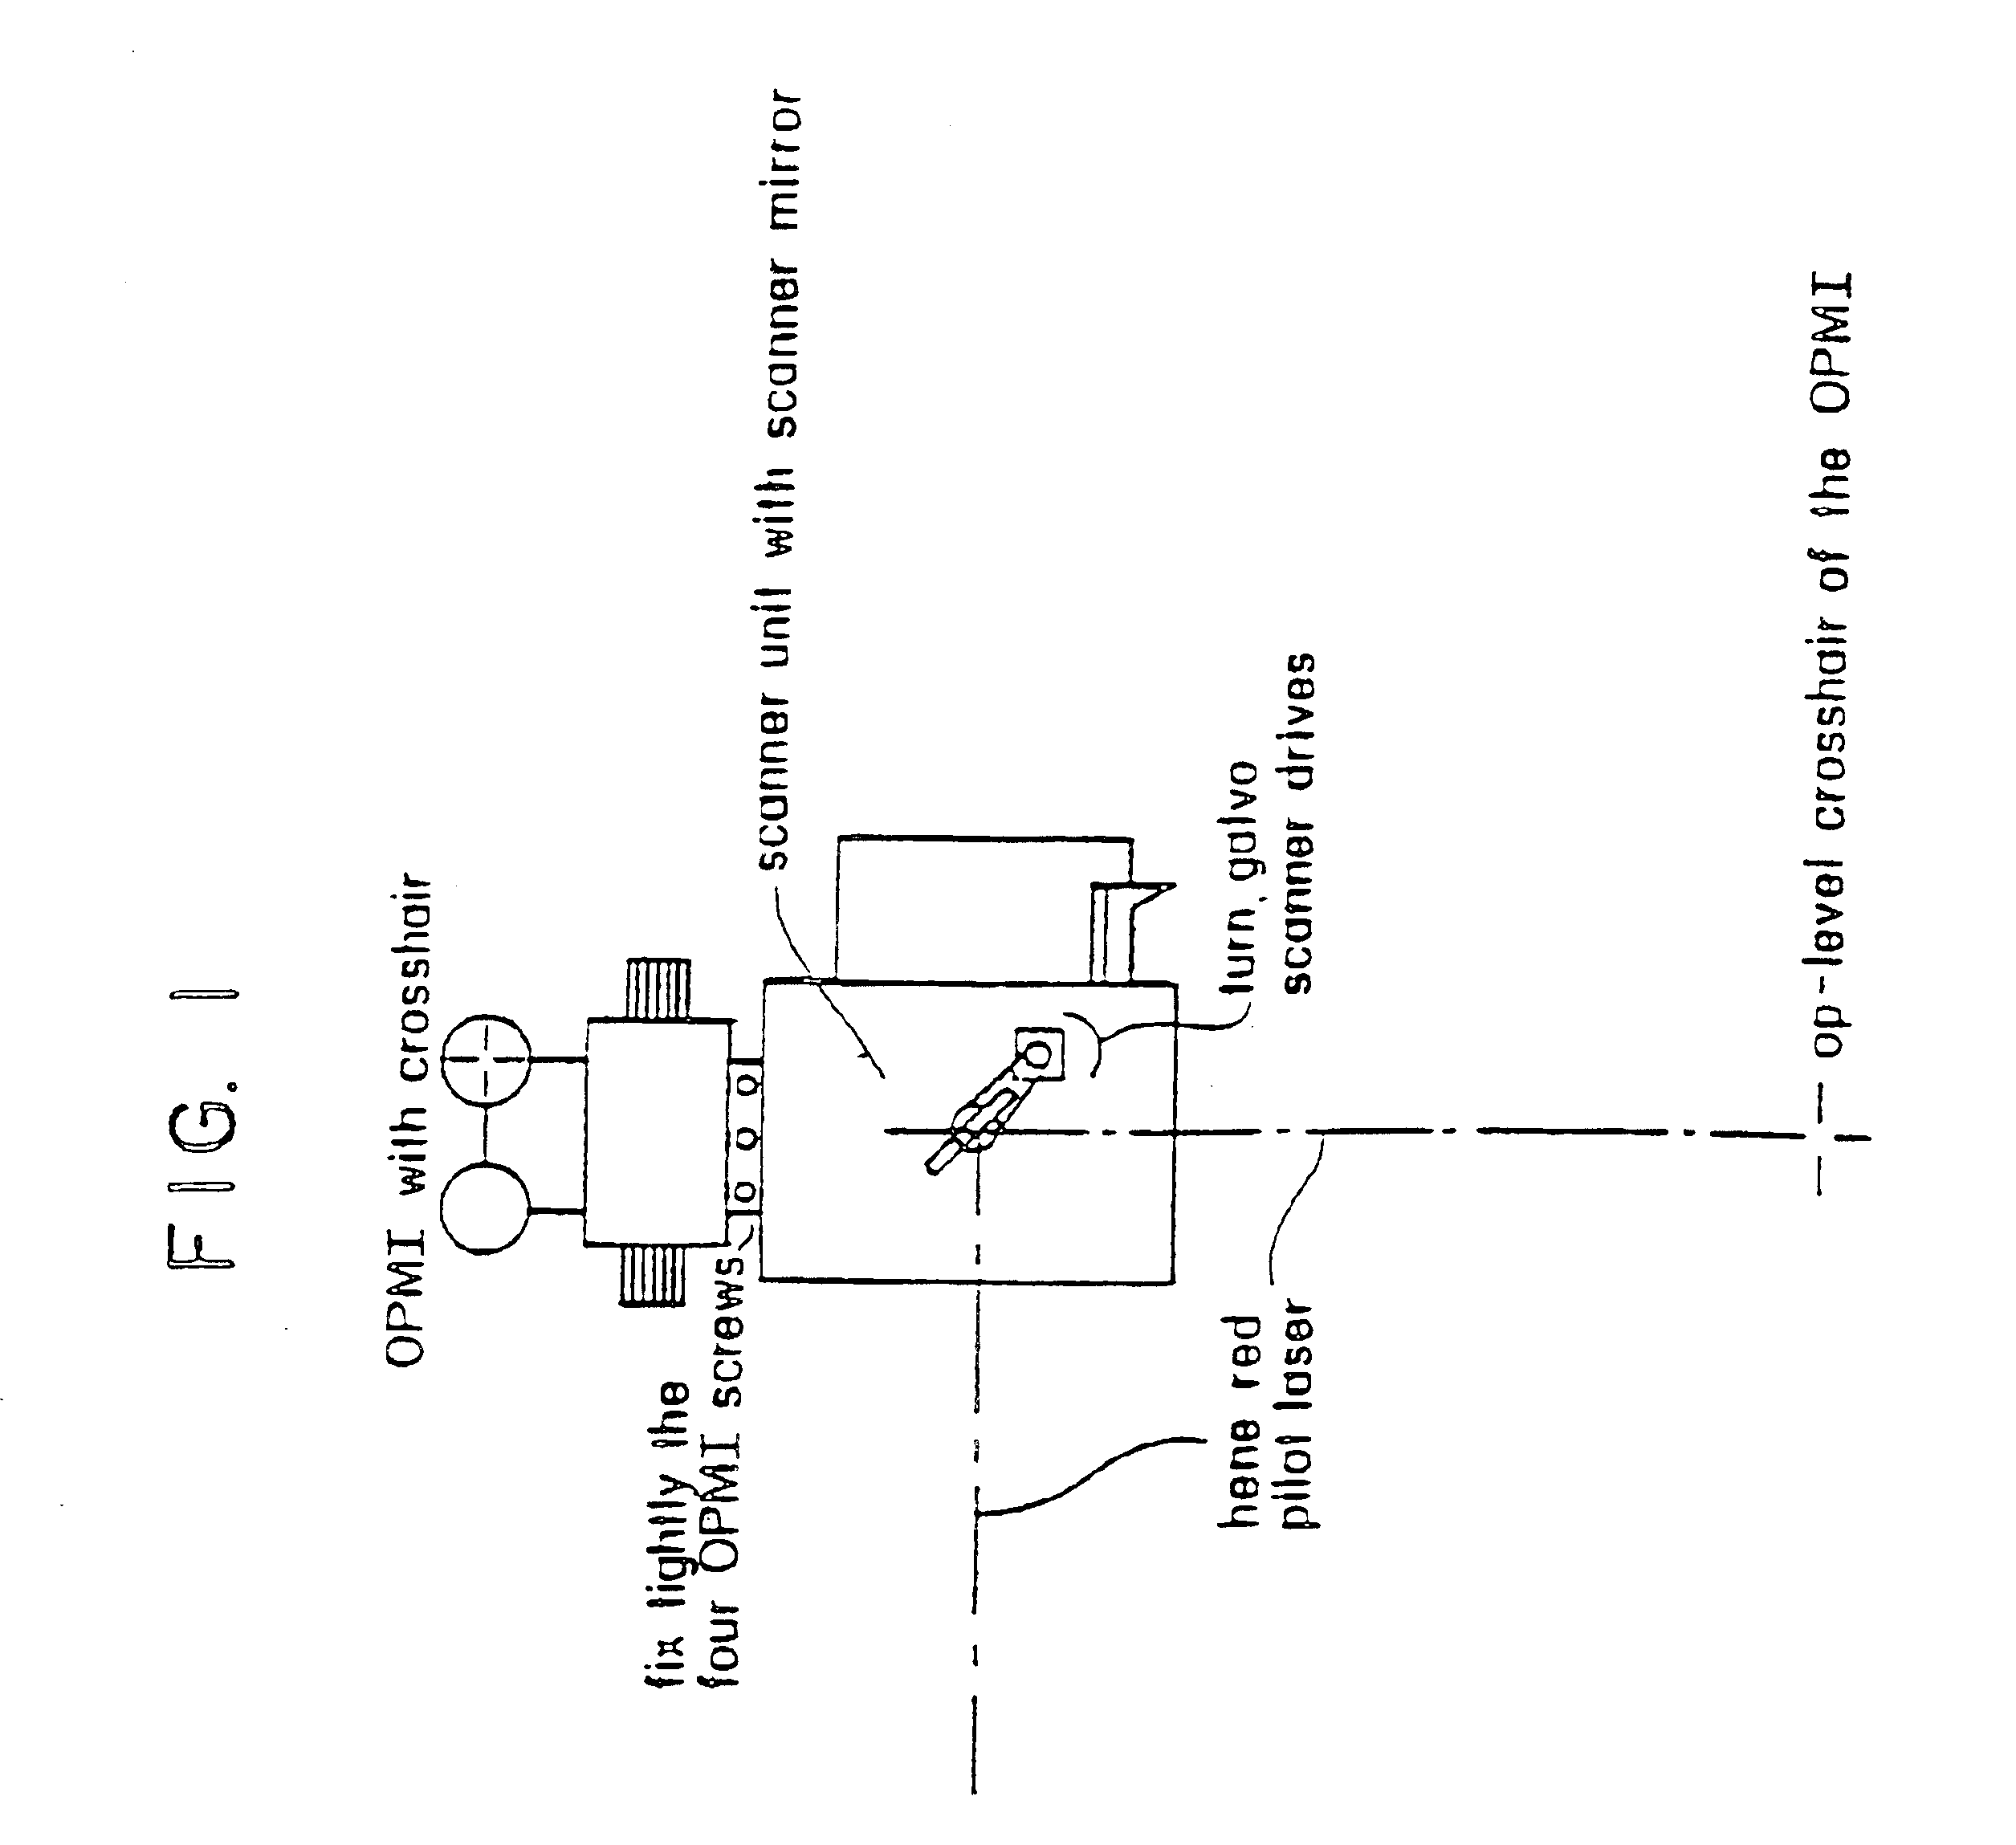 Apparatus and method for performing presbyopia corrective surgery